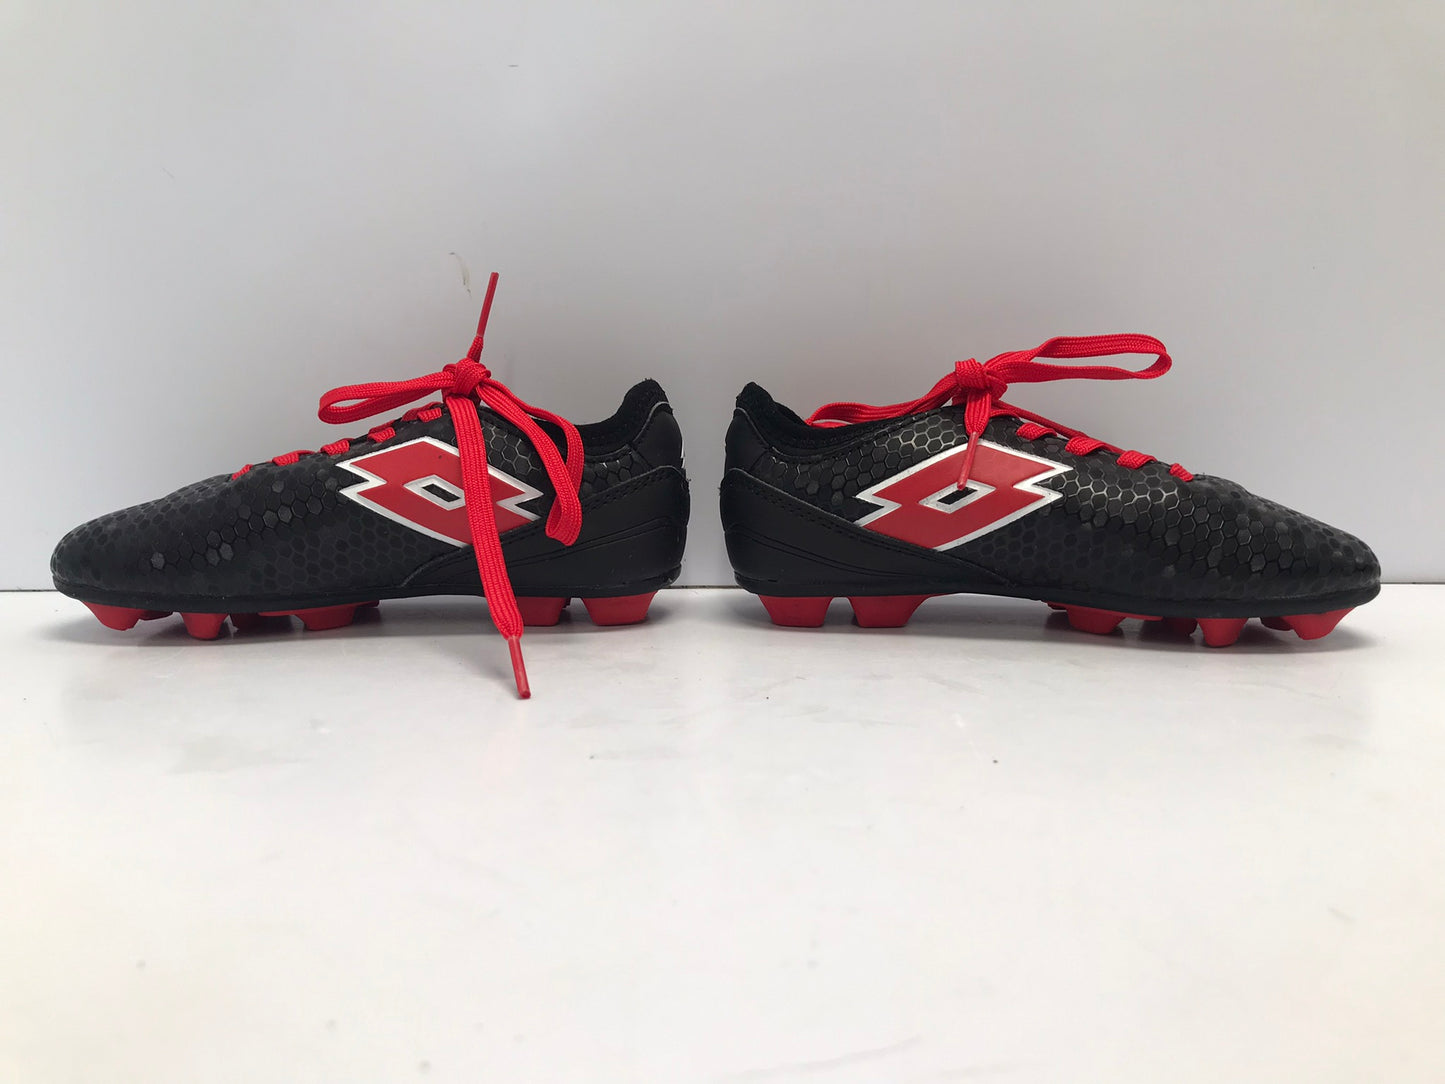 Soccer Shoes Cleats Child Size 12 Lotto Black Red Like New